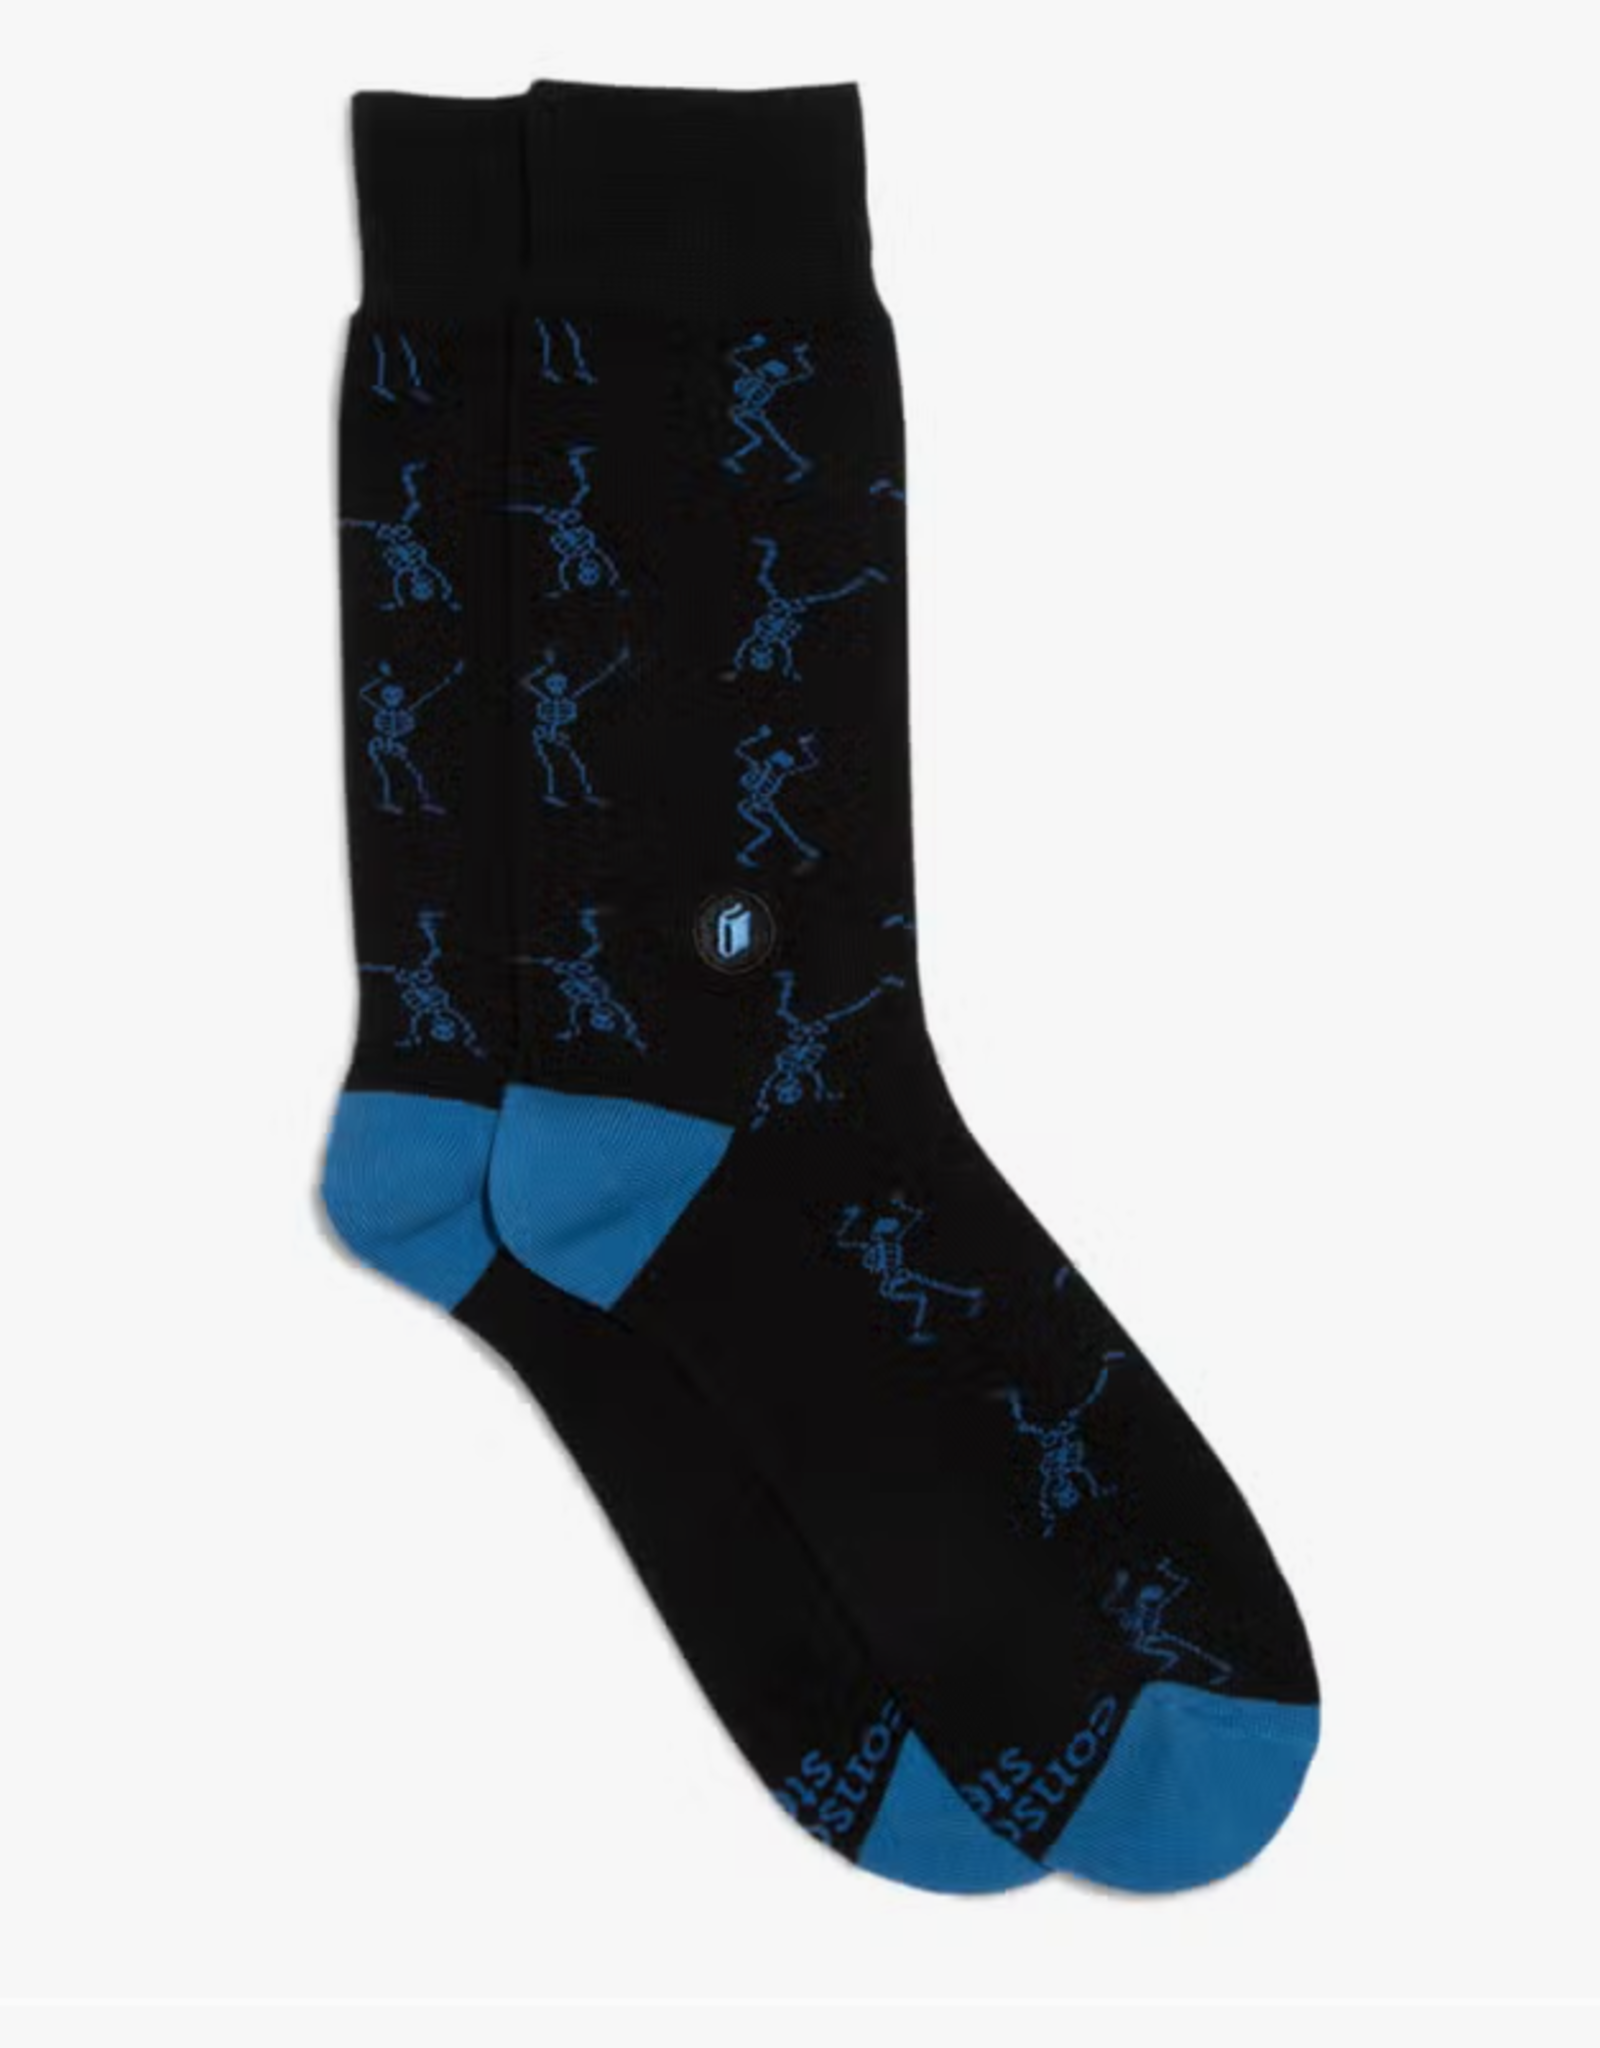 Conscious Step Socks that Give Books (Black Skeletons)